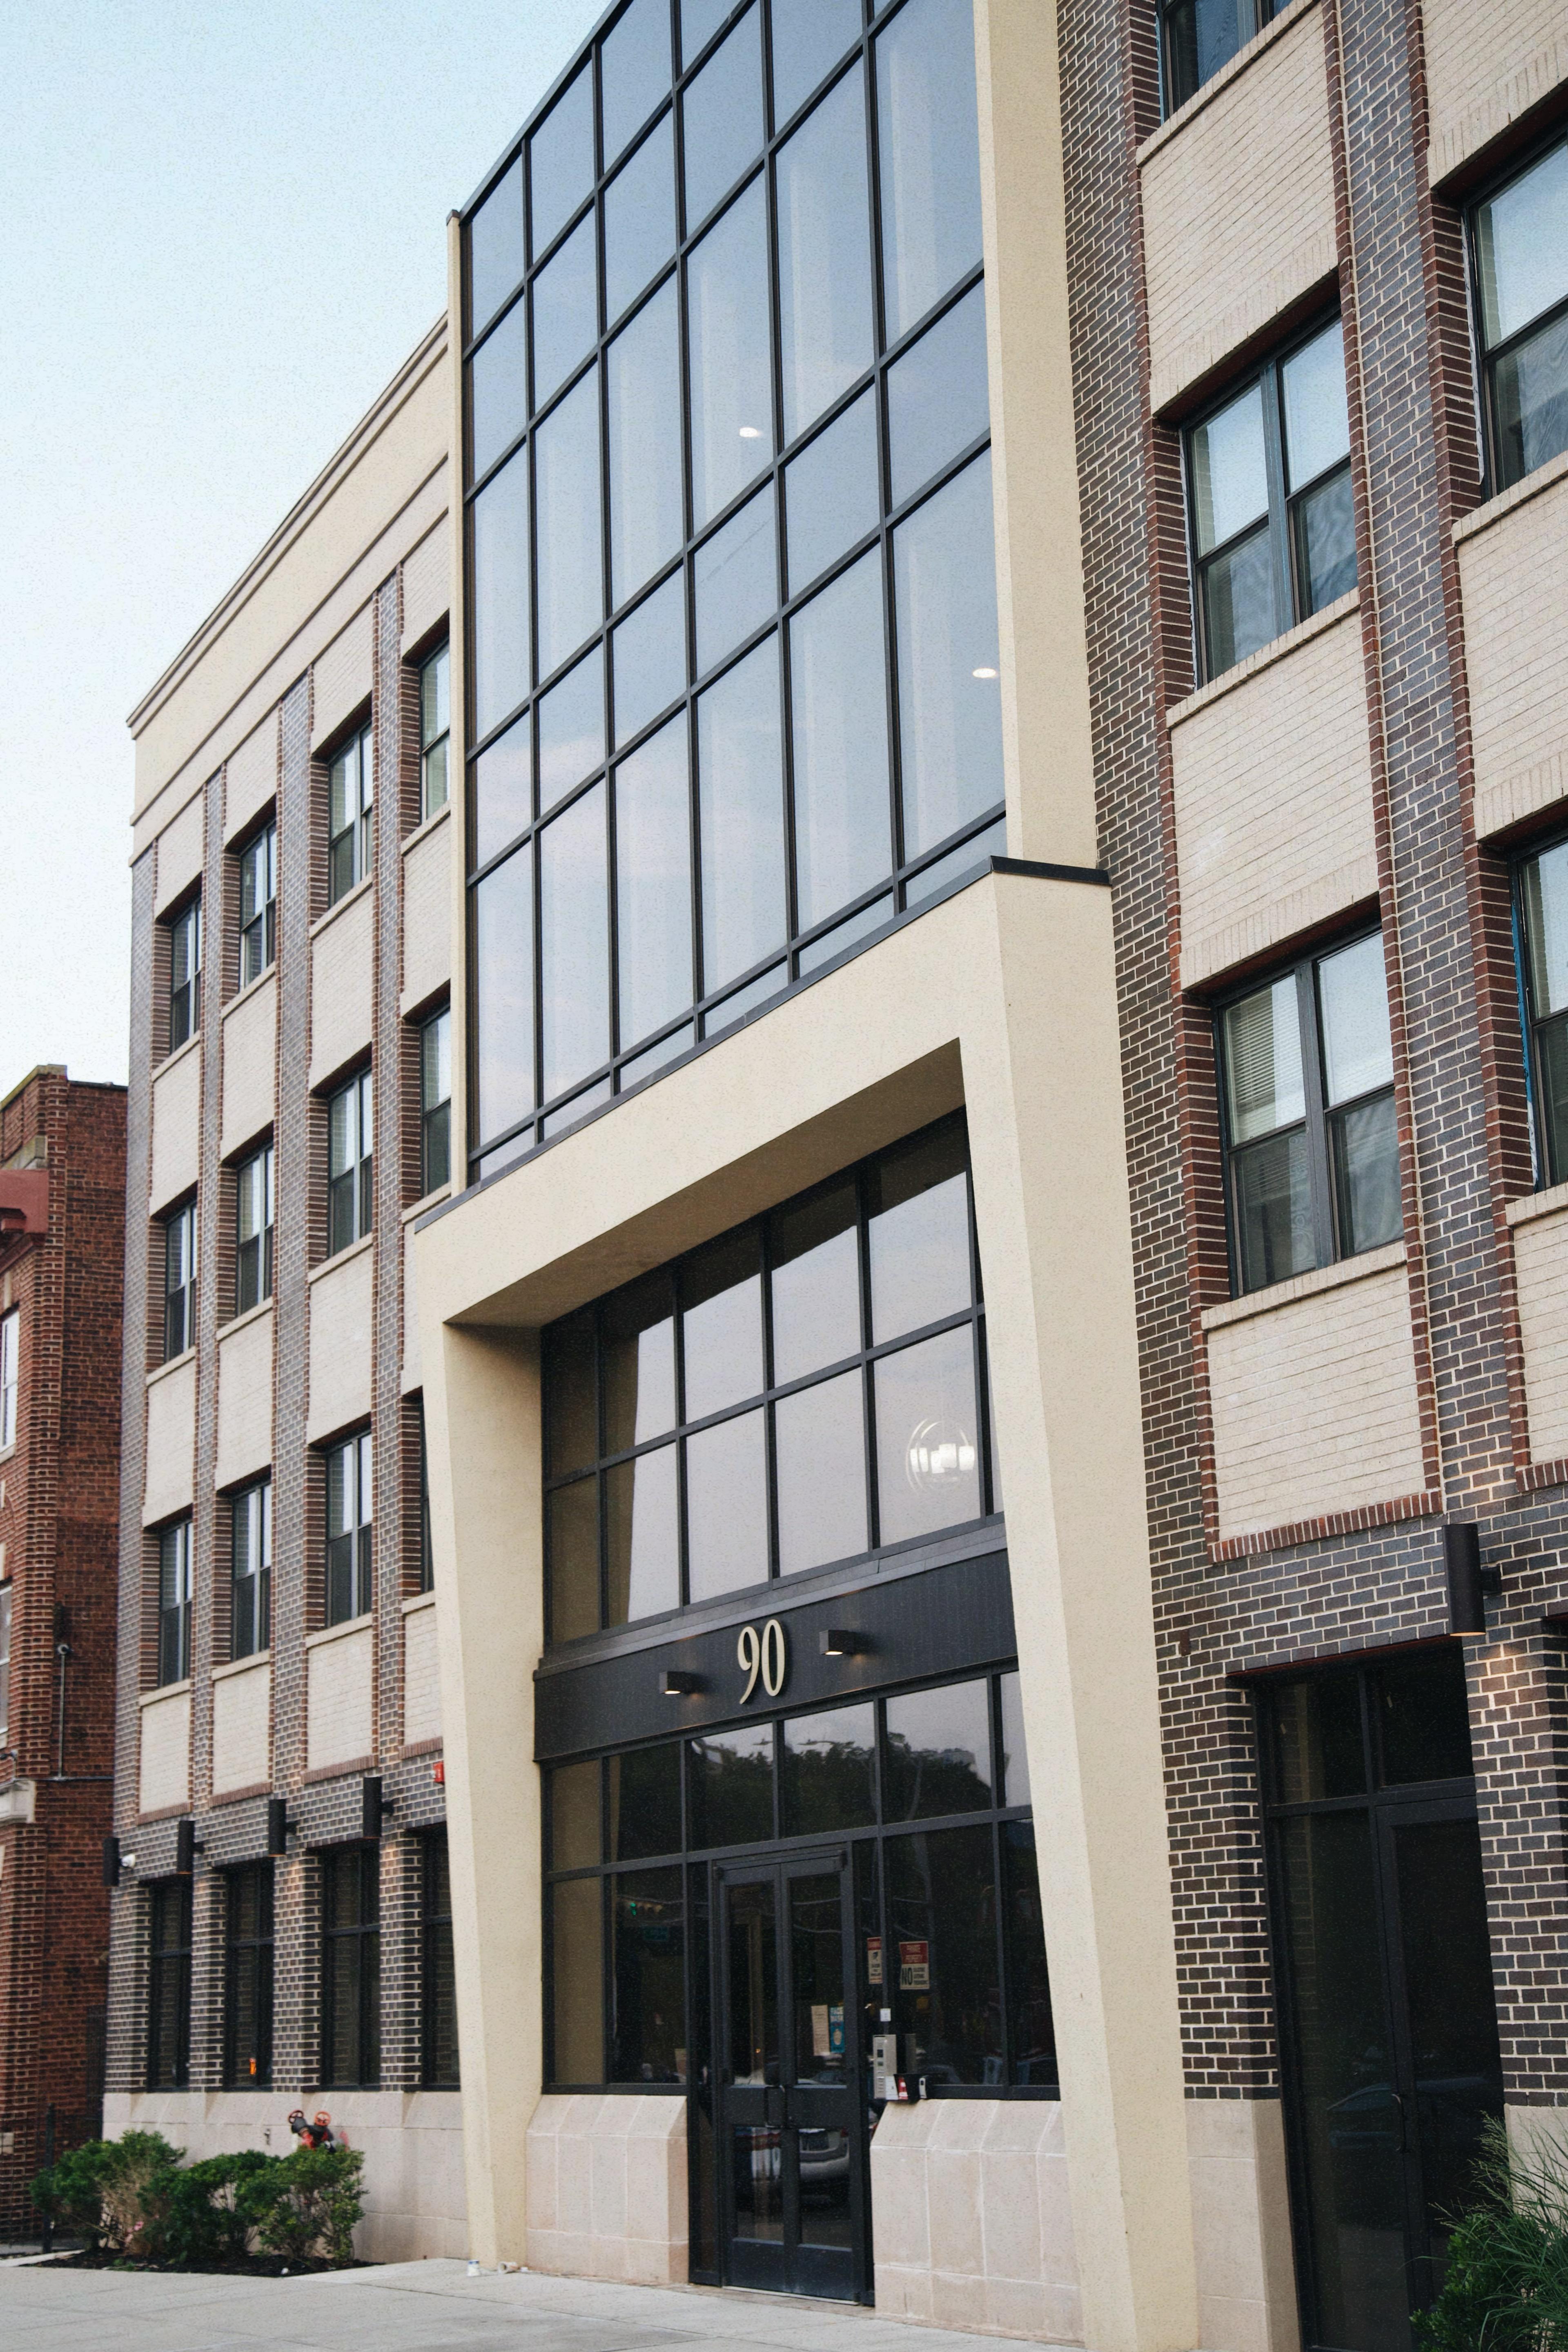 The Lofts at Lincoln Park mark Mid-Atlantic's first foray into large multifamily development